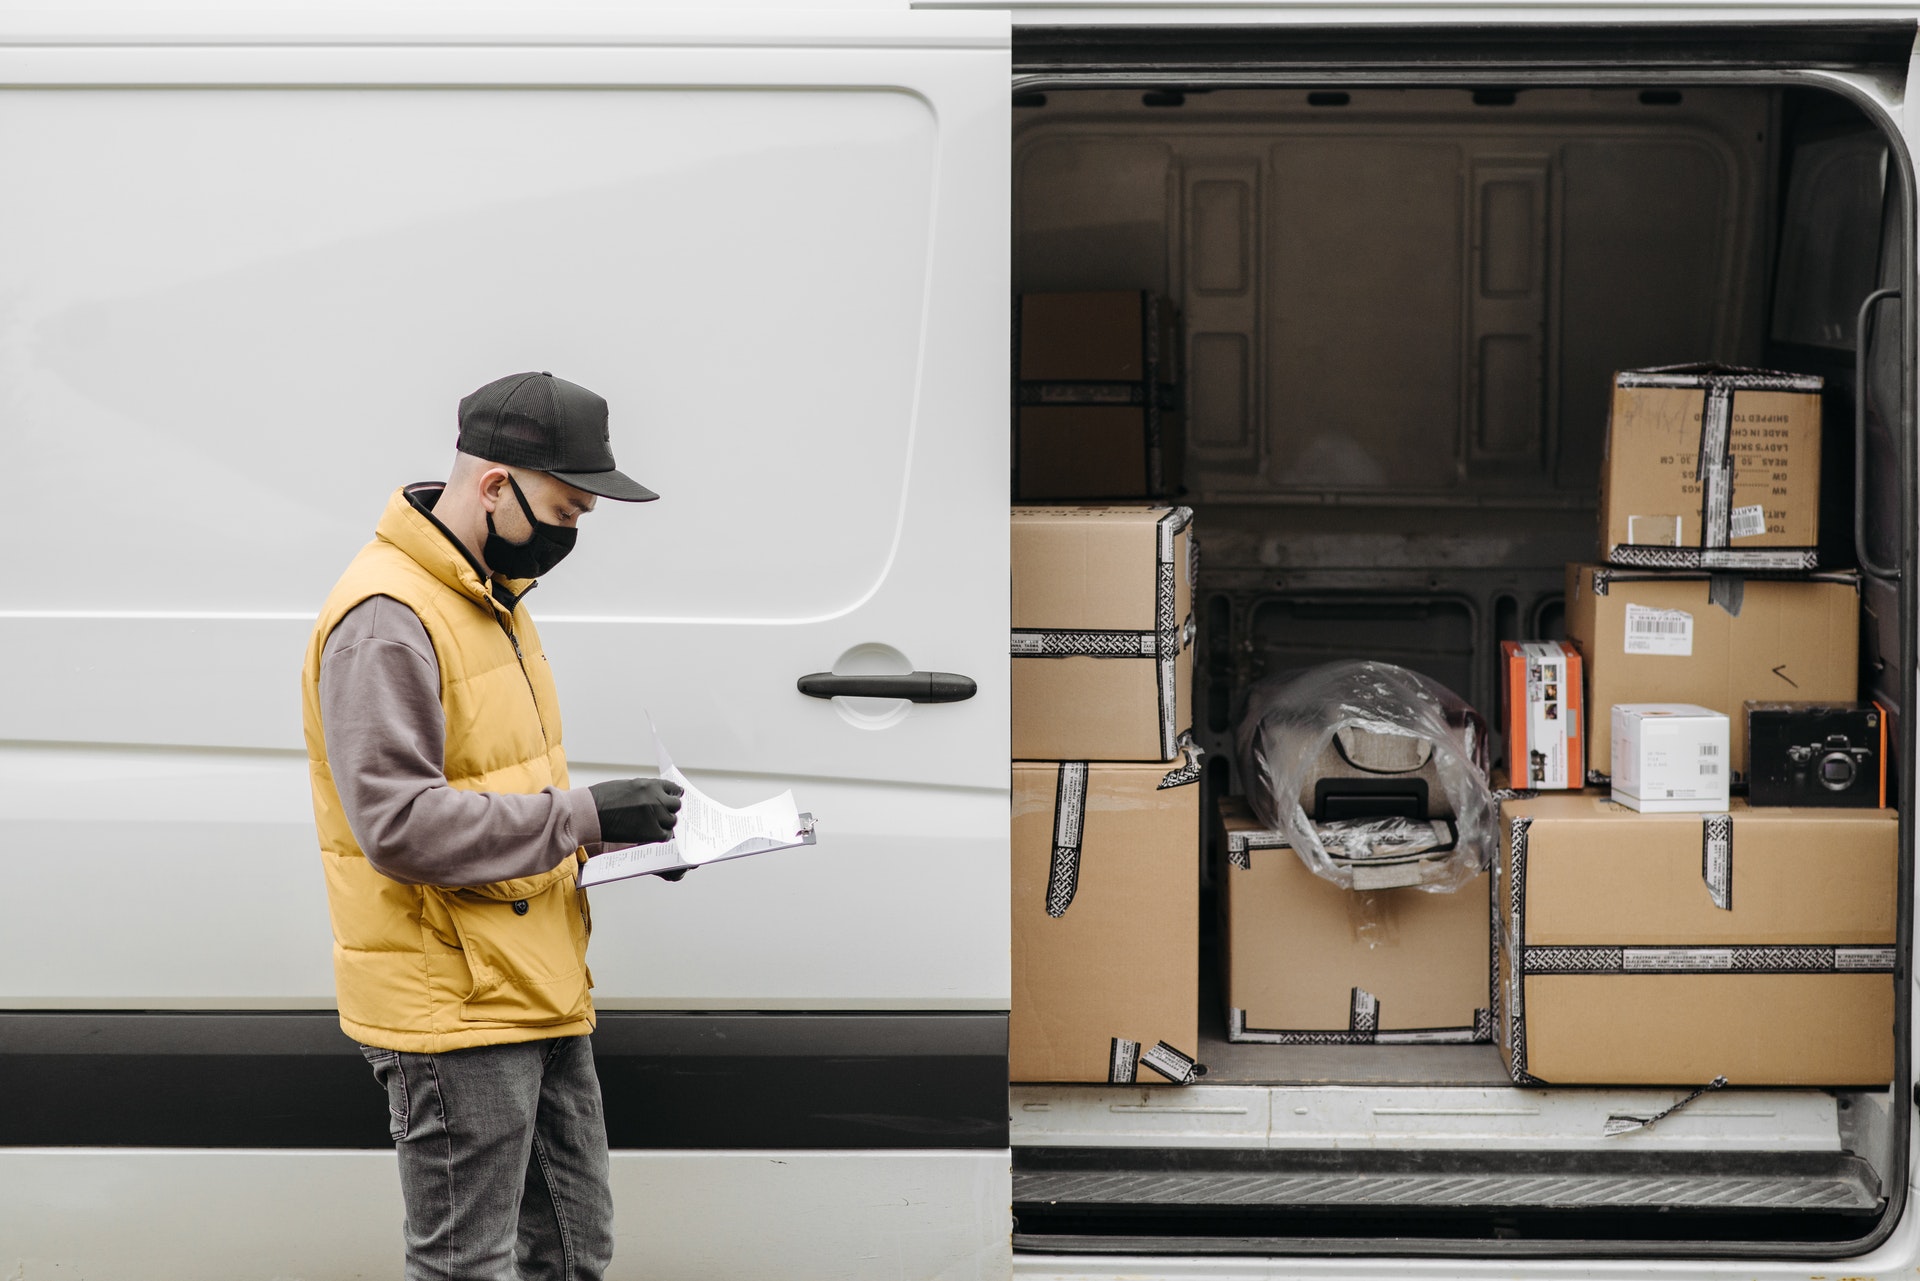 The Same Day Courier Service Explained - EcoSpeed Same-Day Couriers